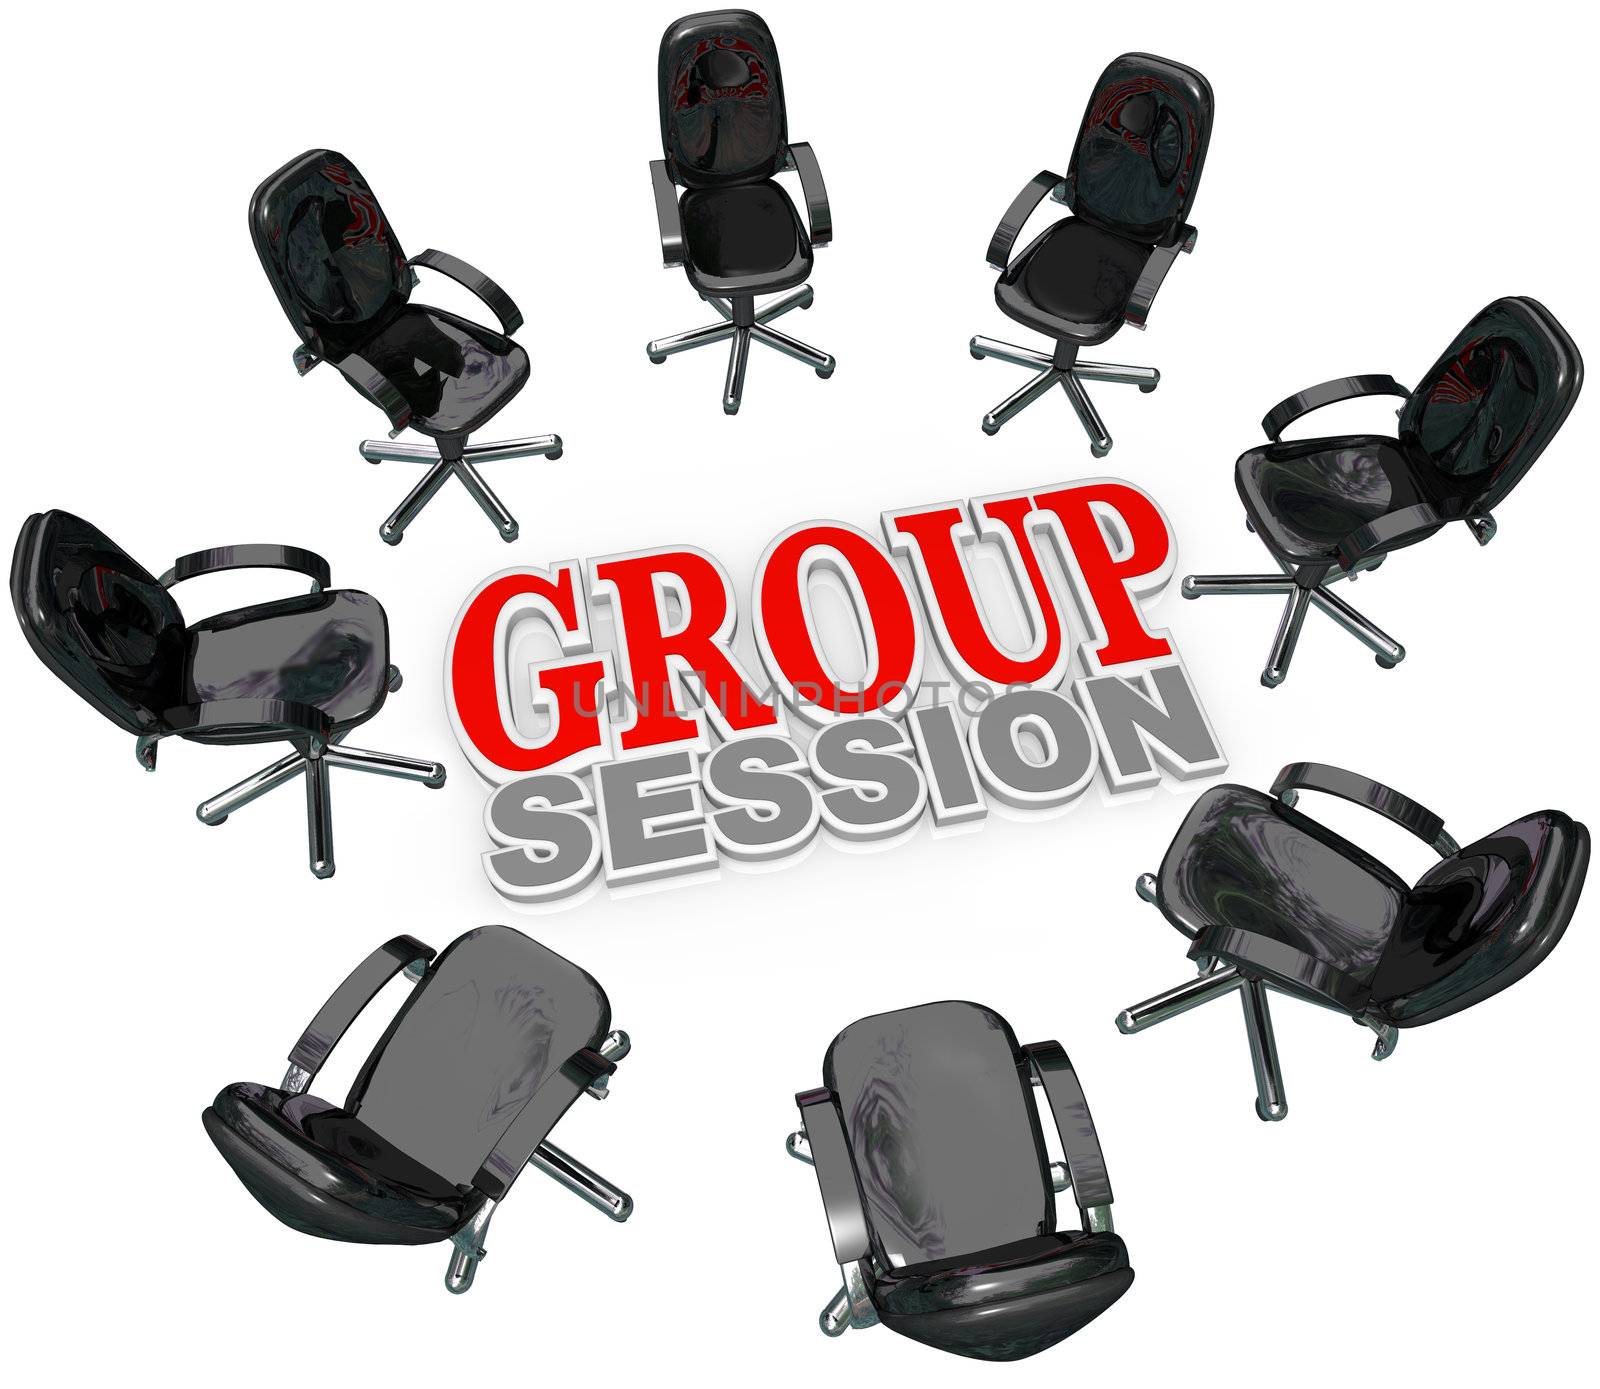 A number of chairs gathered in a circle around the words Group Session for a meeting or interaction with several people for therapy or business brainstorming or sharing ideas